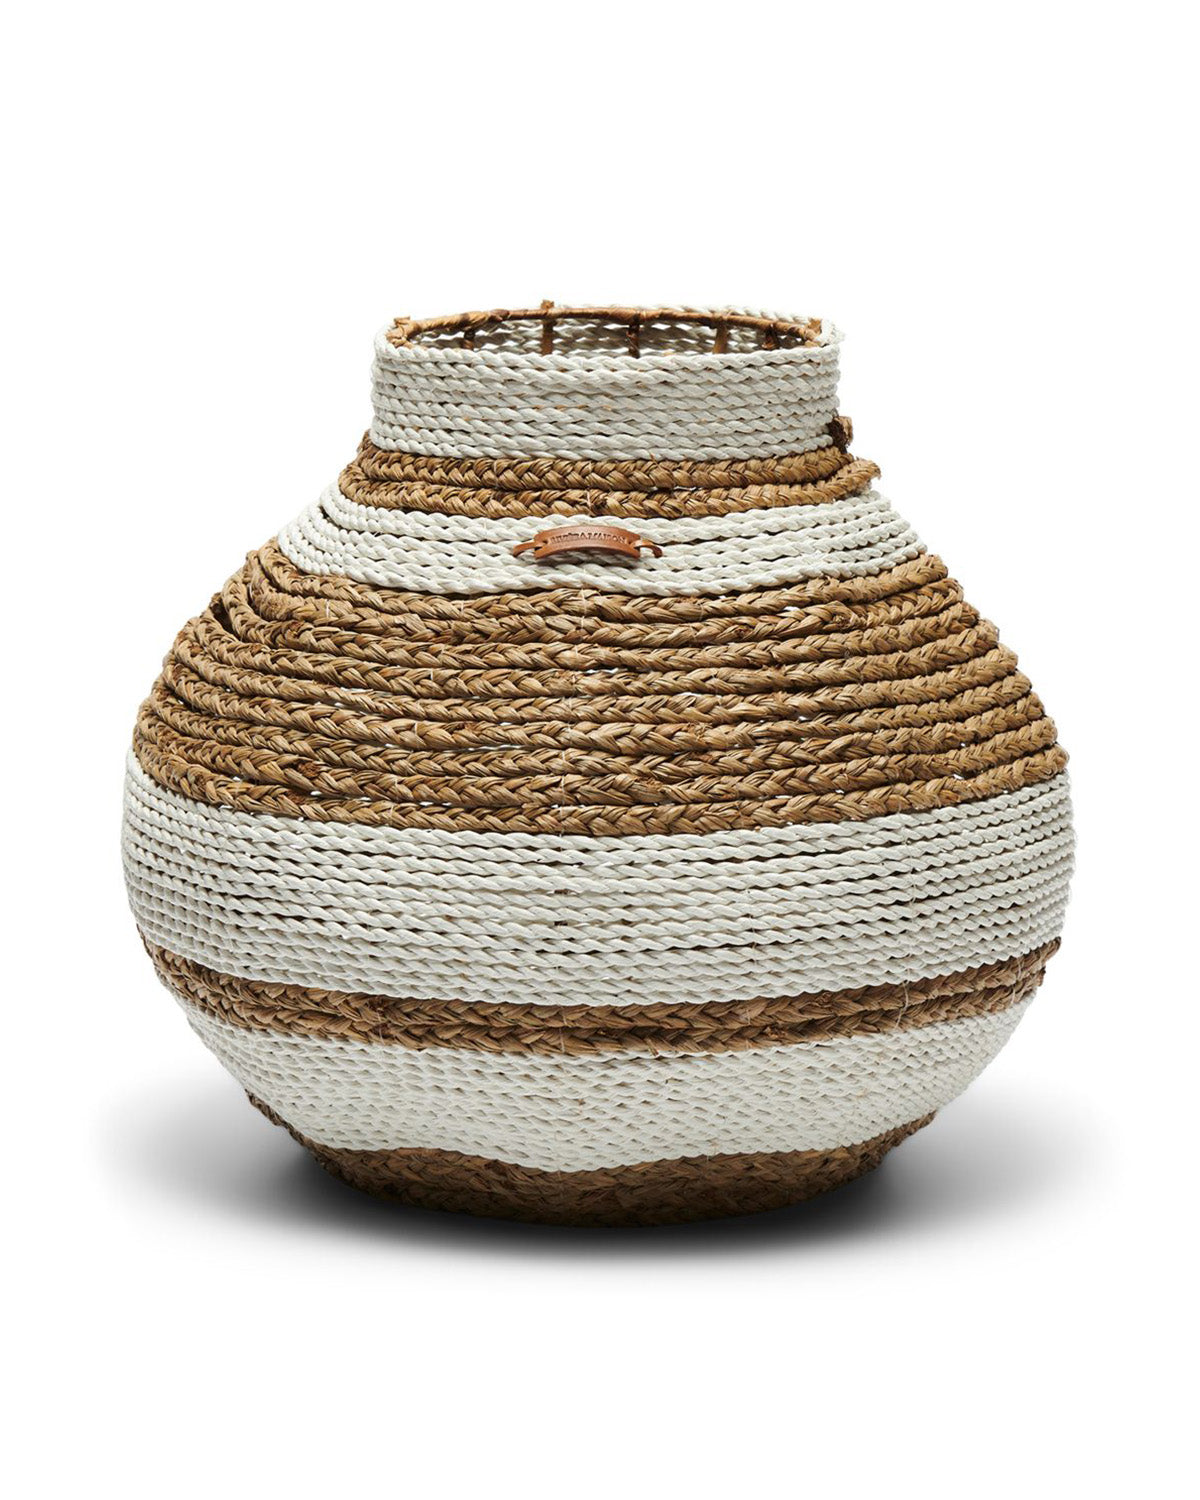 EMELISSE VASE beautiful interior accessory shaped like a full vase but made of raffia hand-woven around a sturdy frame, partially painted white by Riviera Maison